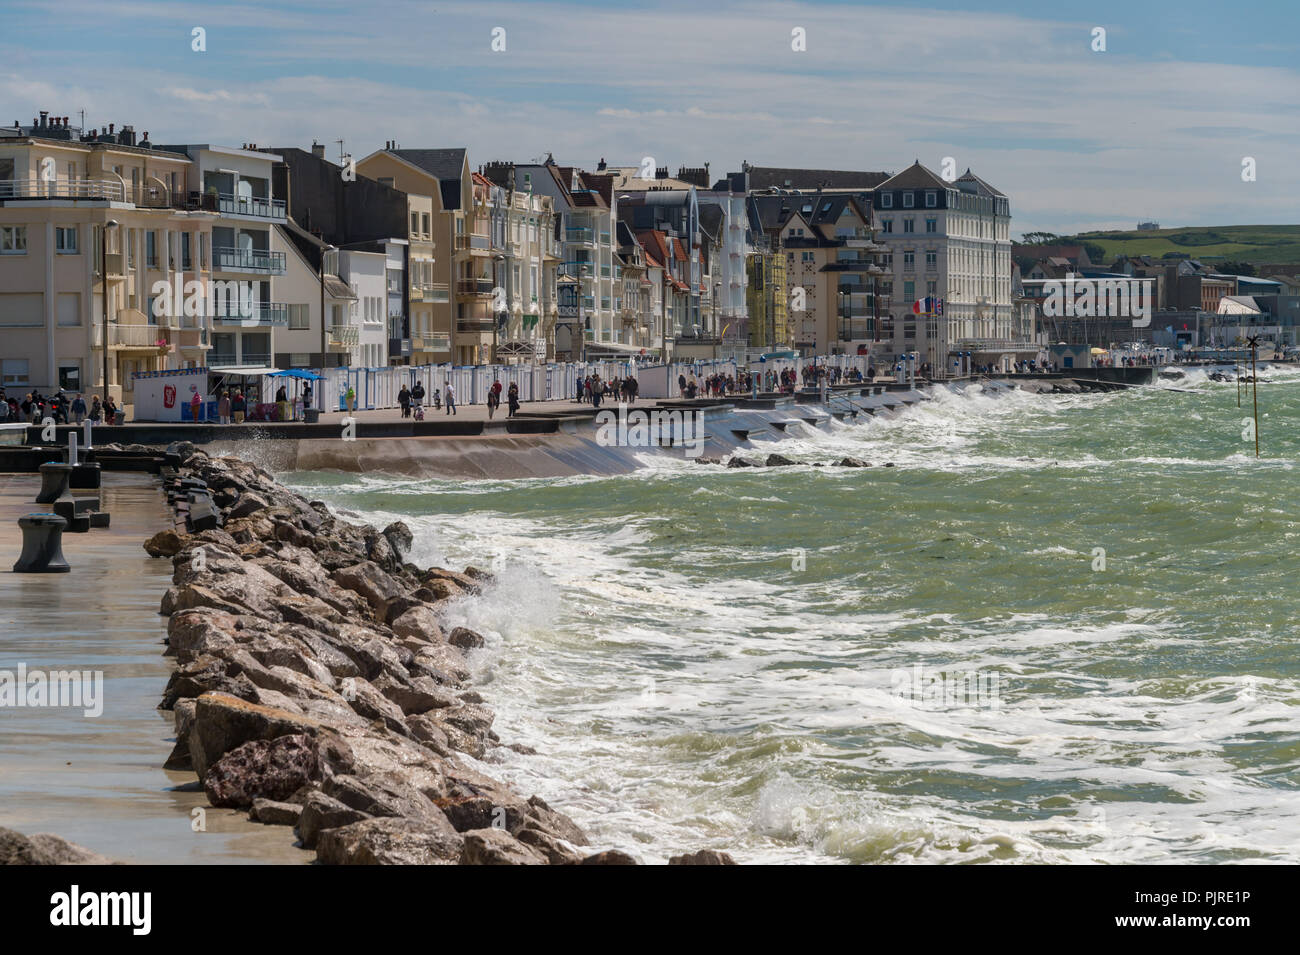 Wimereux, France - 16 June 2018: Wide angle view of the waterfront promenade with waves hitting the sea wall. Stock Photo